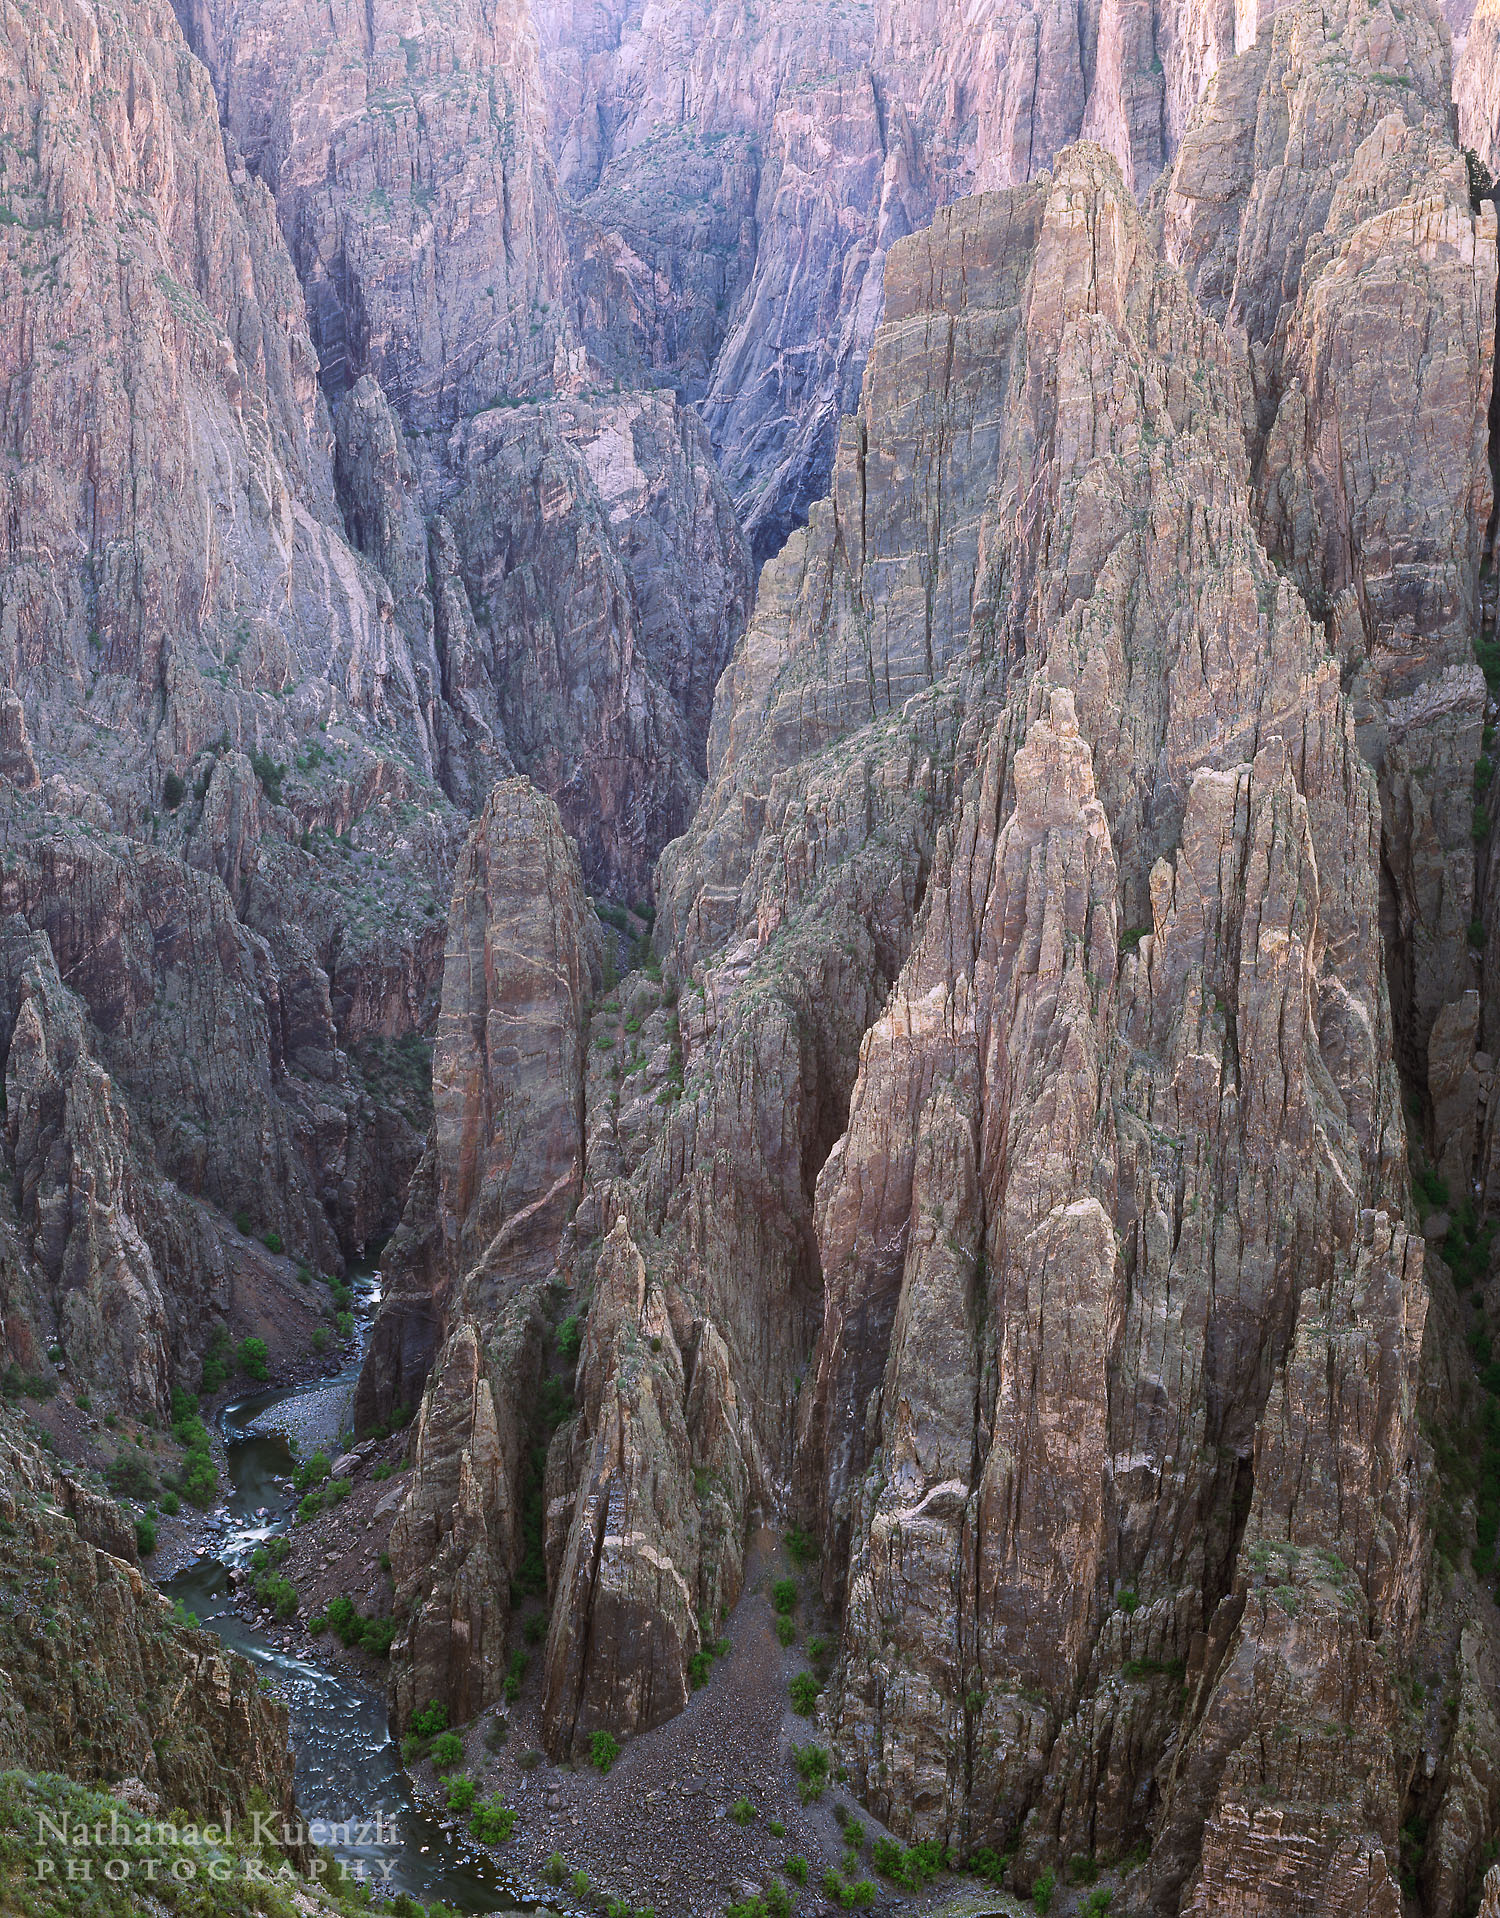   Black Canyon of the Gunnison National Park, Colorado, May 2004  